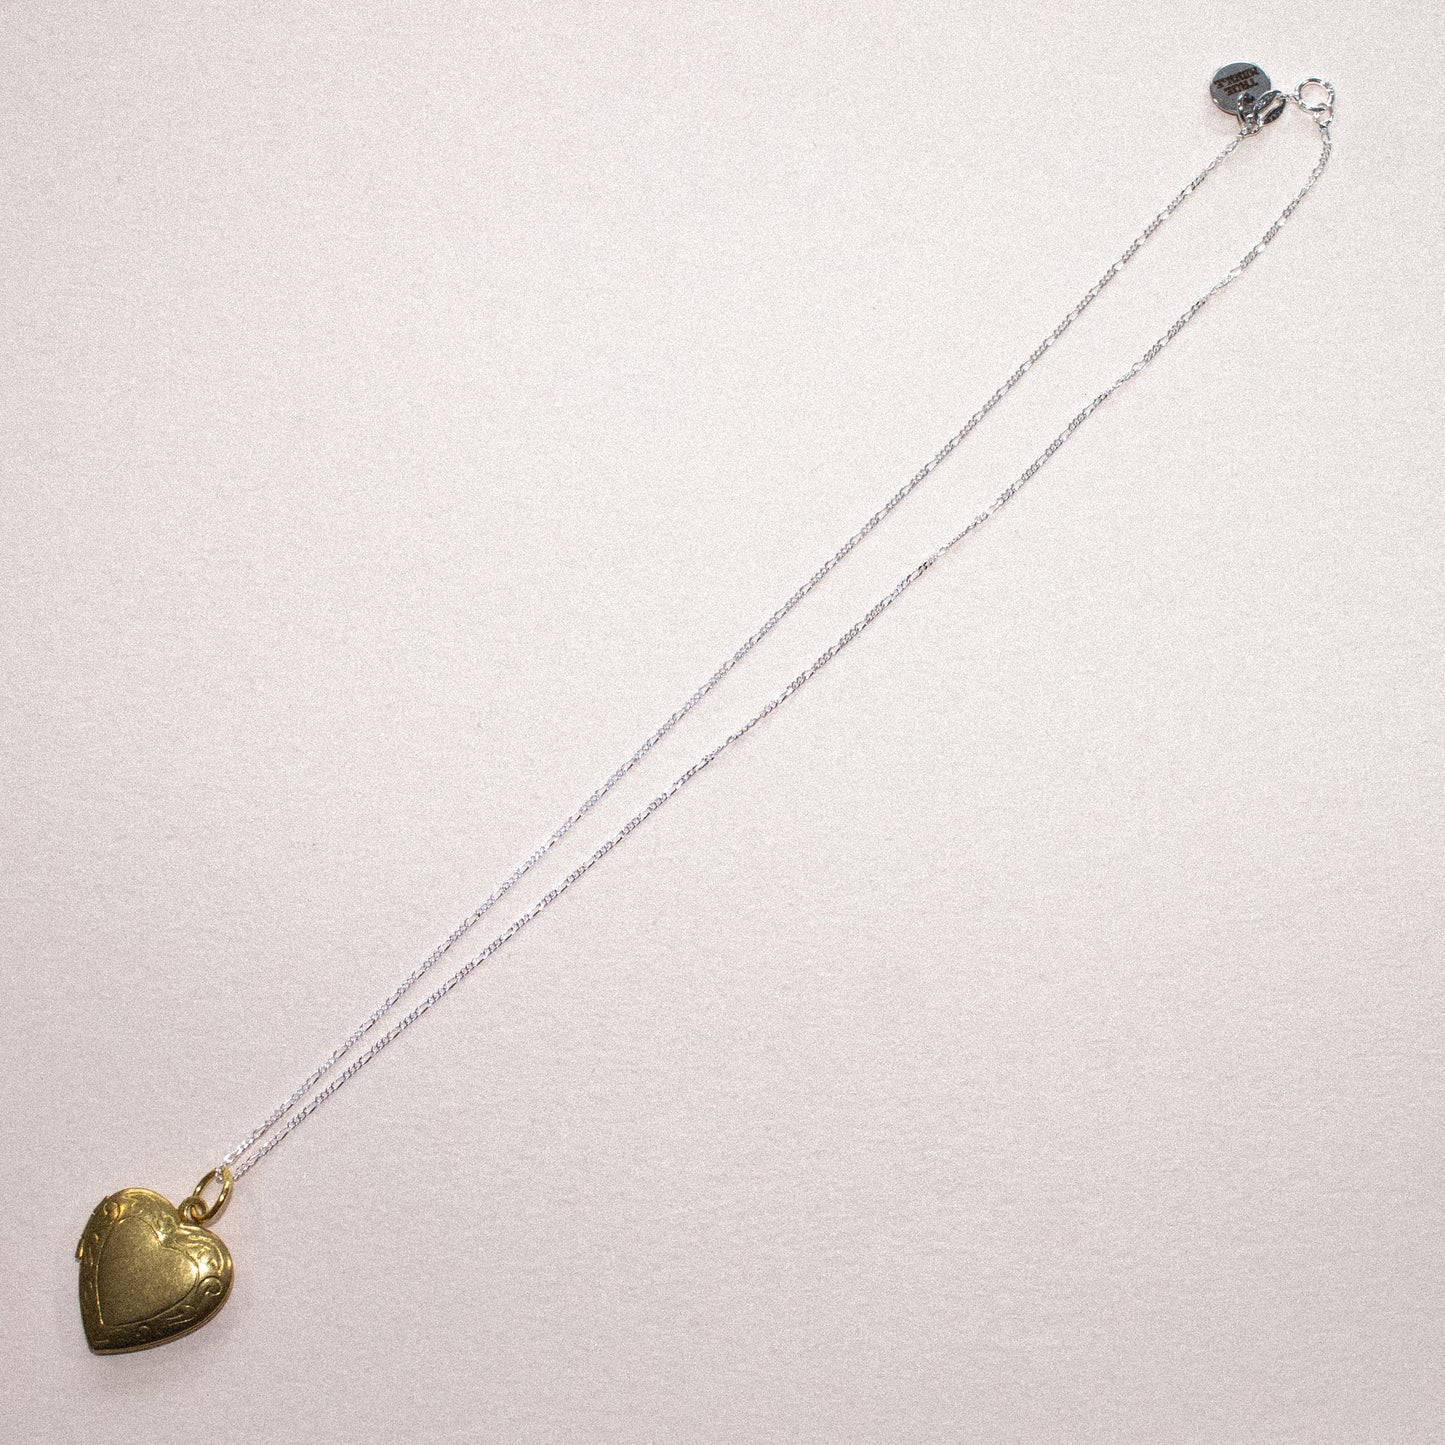 Two Tone Heart Necklace